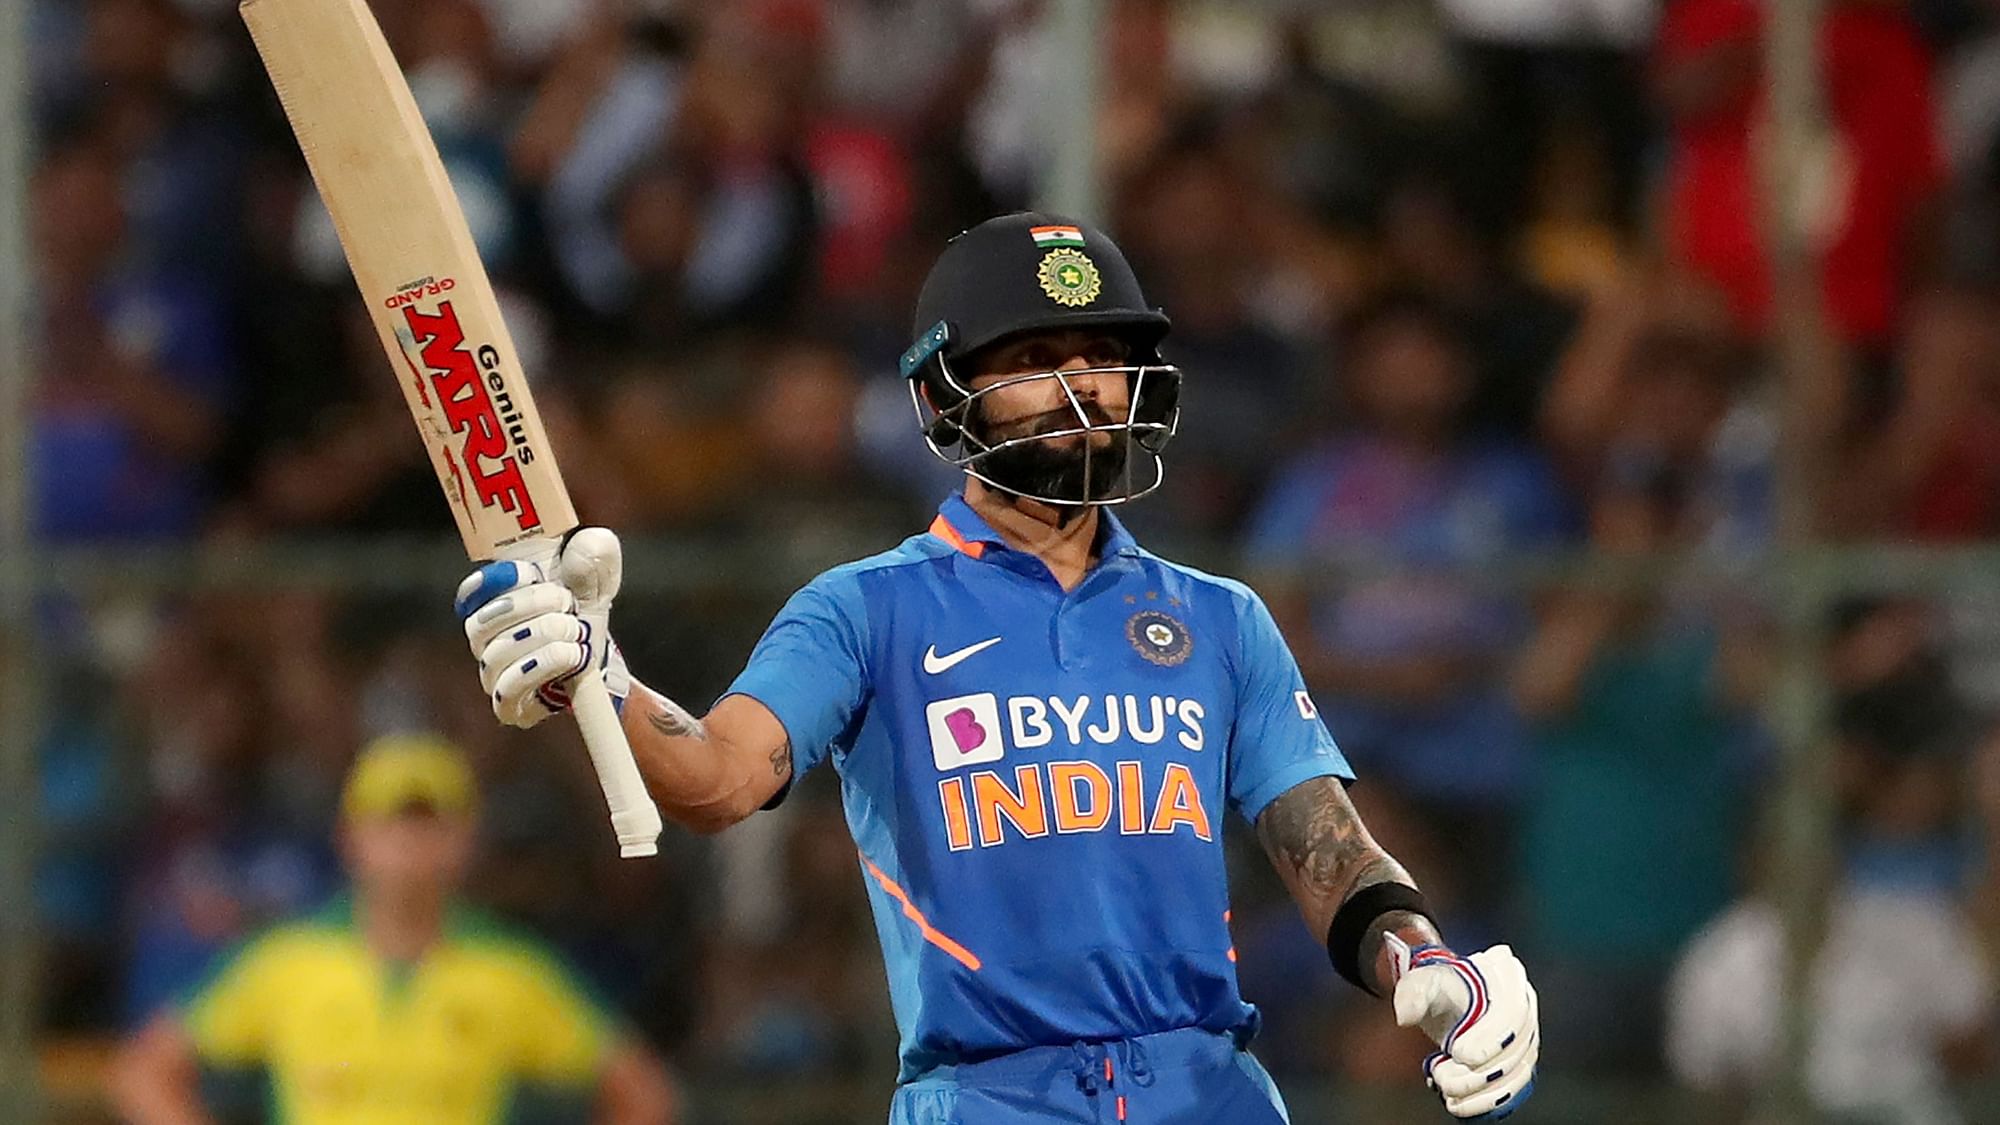 Virat Kohli on Sunday became the fastest to 5,000 runs in ODI cricket as captain of a side.